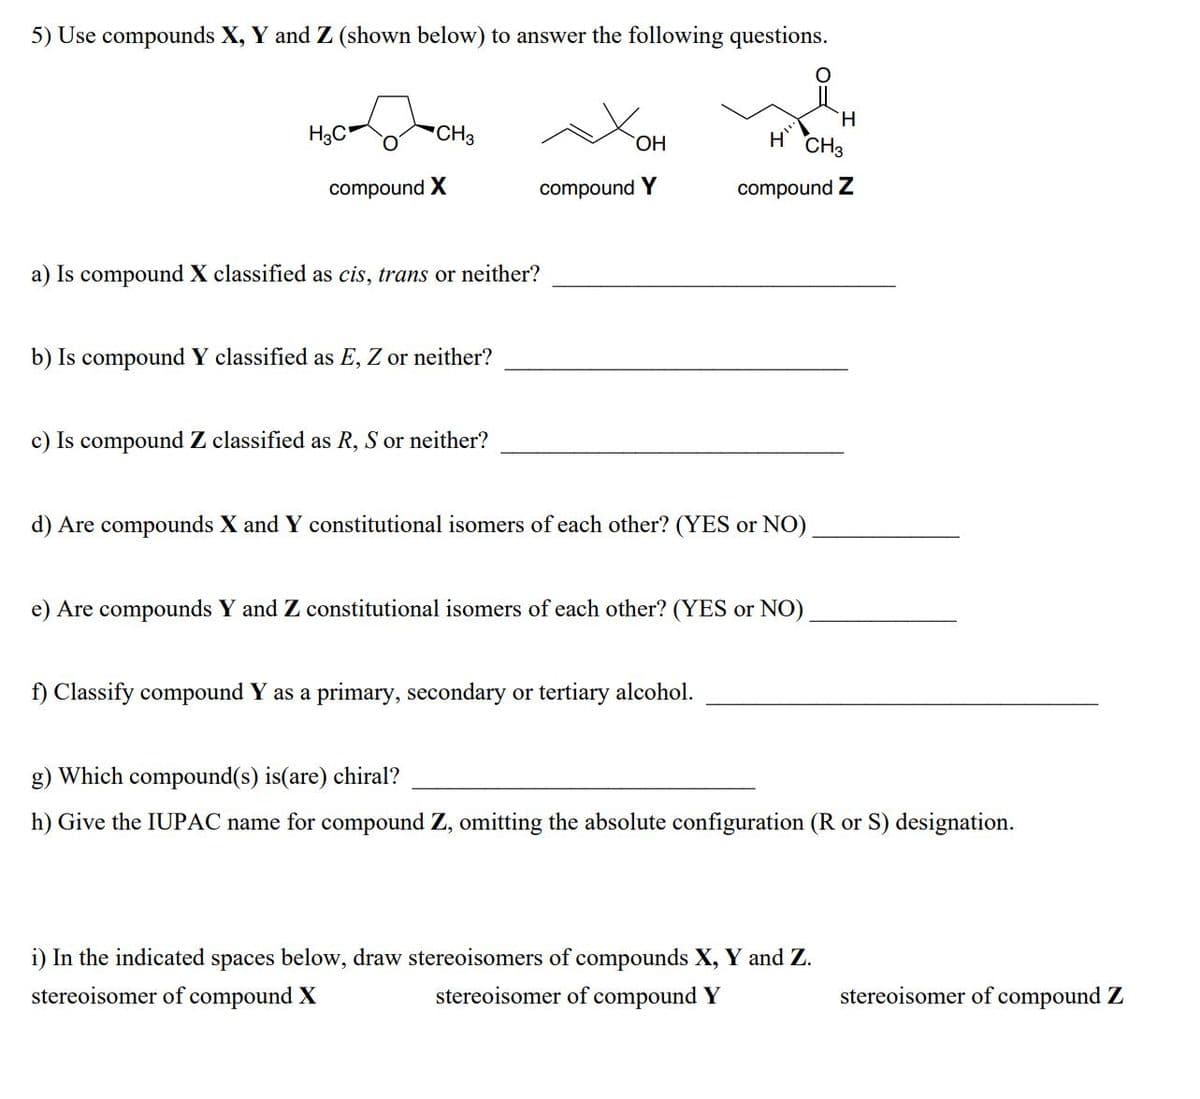 5) Use compounds X, Y and Z (shown below) to answer the following questions.
H.
H3C"
"CH3
ОН
CH3
compound X
compound Y
compound Z
a) Is compound X classified as cis, trans or neither?
b) Is compound Y classified as E, Z or neither?
c) Is compound Z classified as R, S or neither?
d) Are compounds X and Y constitutional isomers of each other? (YES or NO)
e) Are compounds Y and Z constitutional isomers of each other? (YES or NO)
f) Classify compound Y as a primary, secondary or tertiary alcohol.
g) Which compound(s) is(are) chiral?
h) Give the IUPAC name for compound Z, omitting the absolute configuration (R or S) designation.
i) In the indicated spaces below, draw stereoisomers of compounds X, Y and Z.
stereoisomer of compound X
stereoisomer of compound Y
stereoisomer of compound Z
